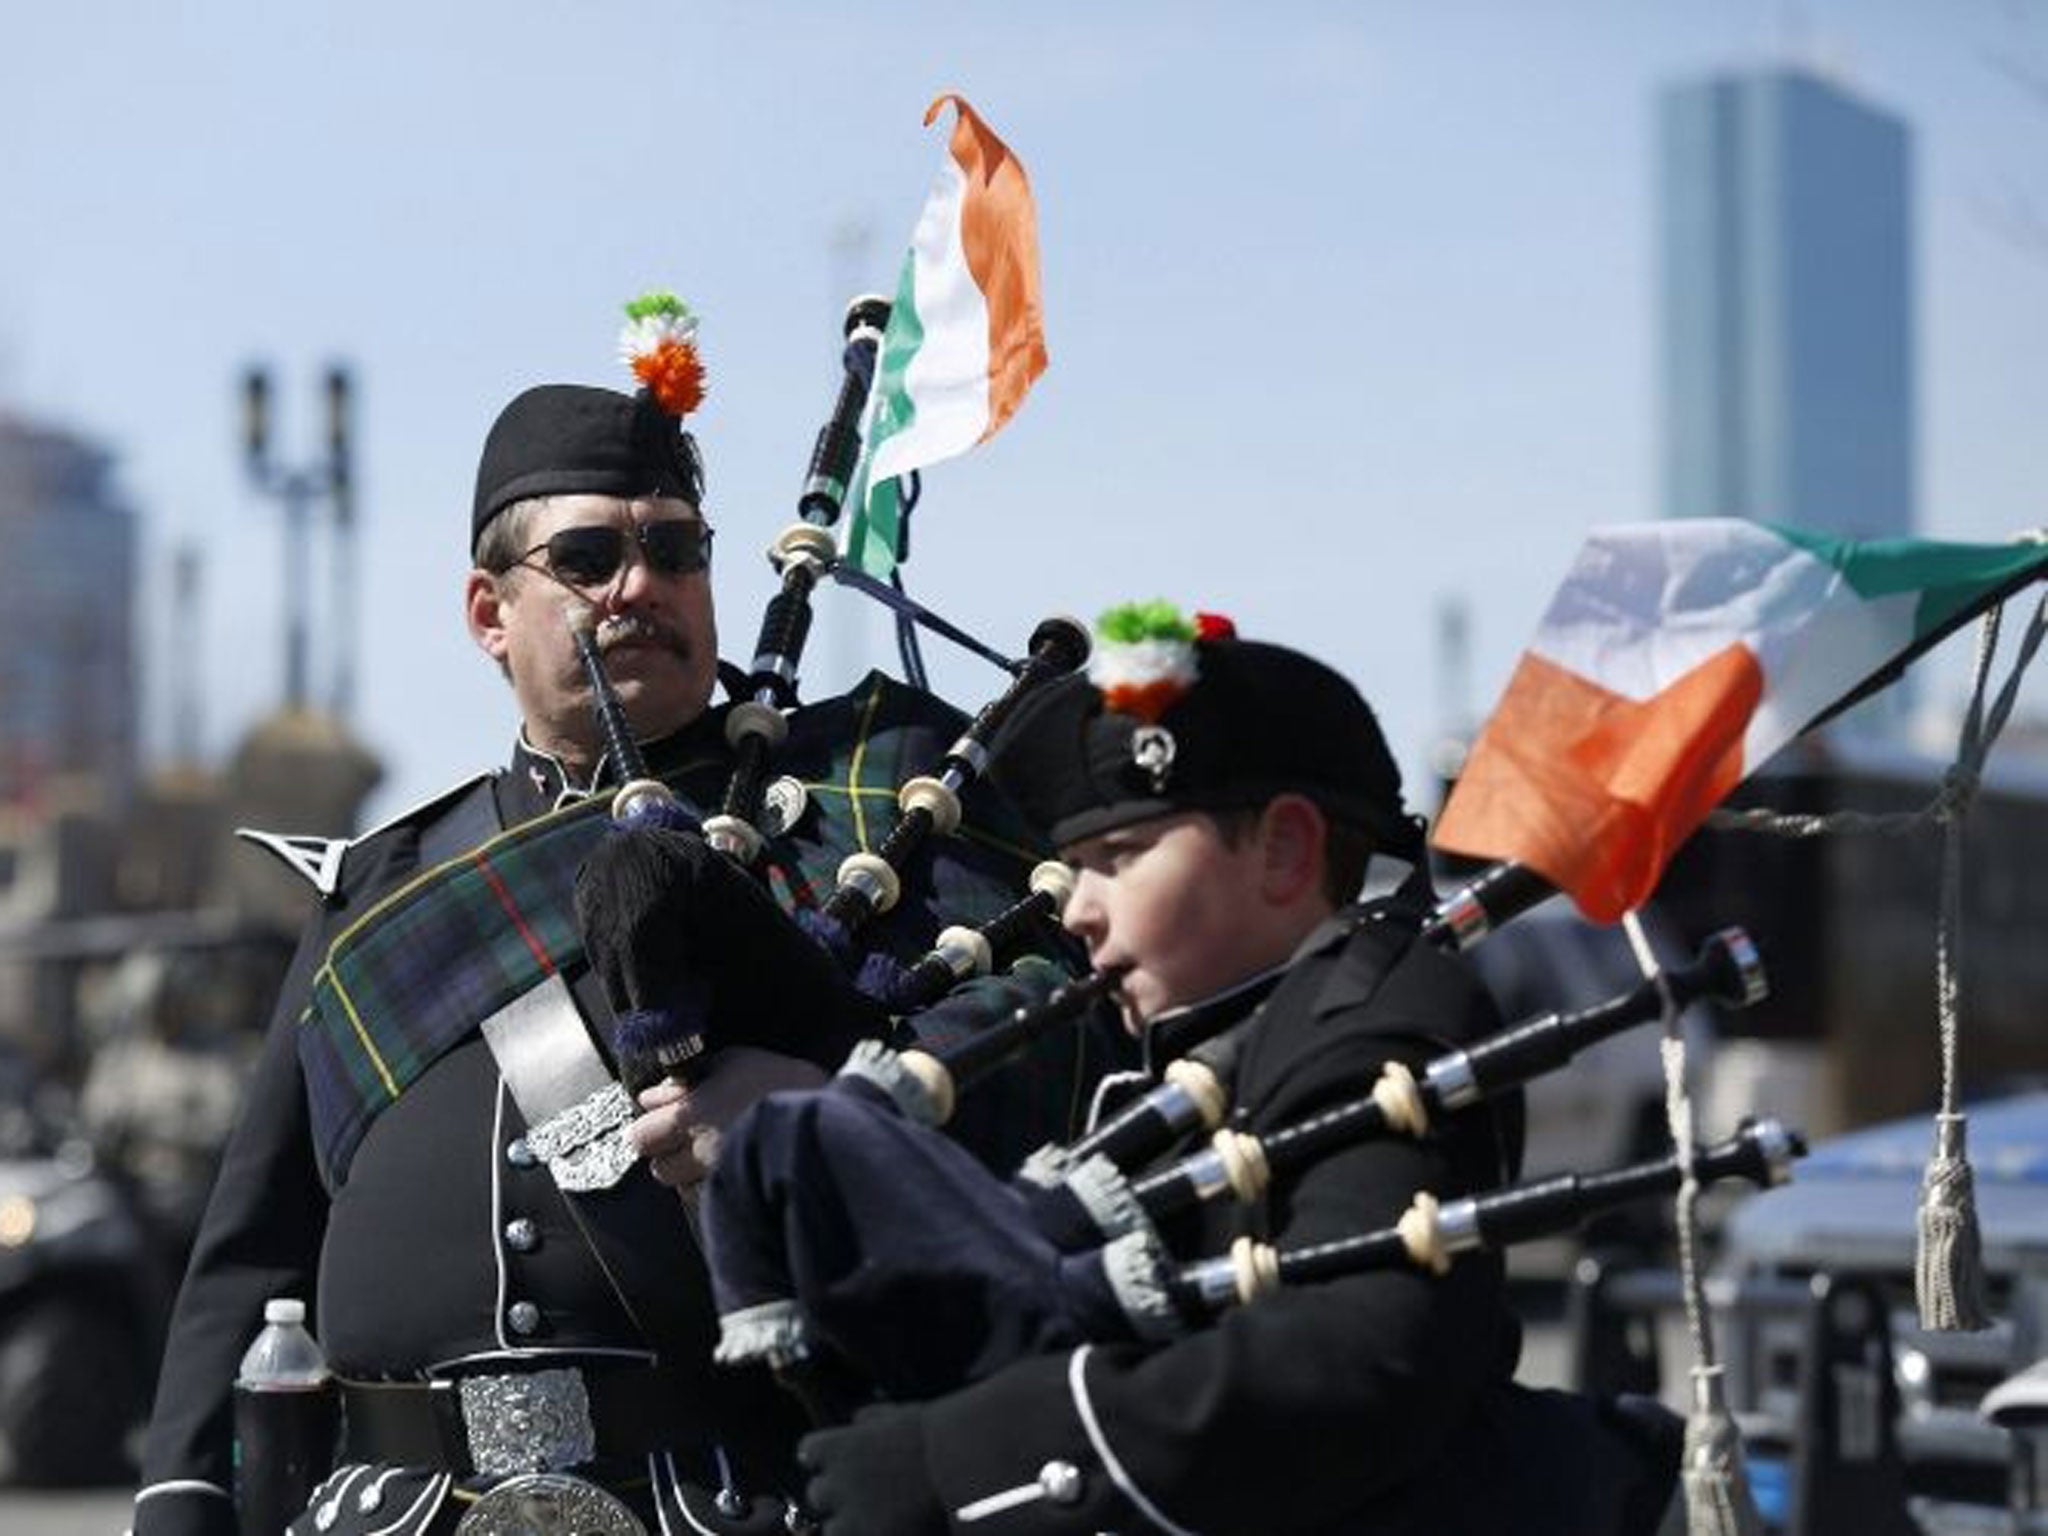 Members of the Quaboag Highlanders Pipes and Drums prepare to march down Broadway during the annual South Boston St. Patrick's Day parade in Boston, Massachusetts March 16, 2014. Boston's Irish-American mayor skipped the parade on Sunday after failing to